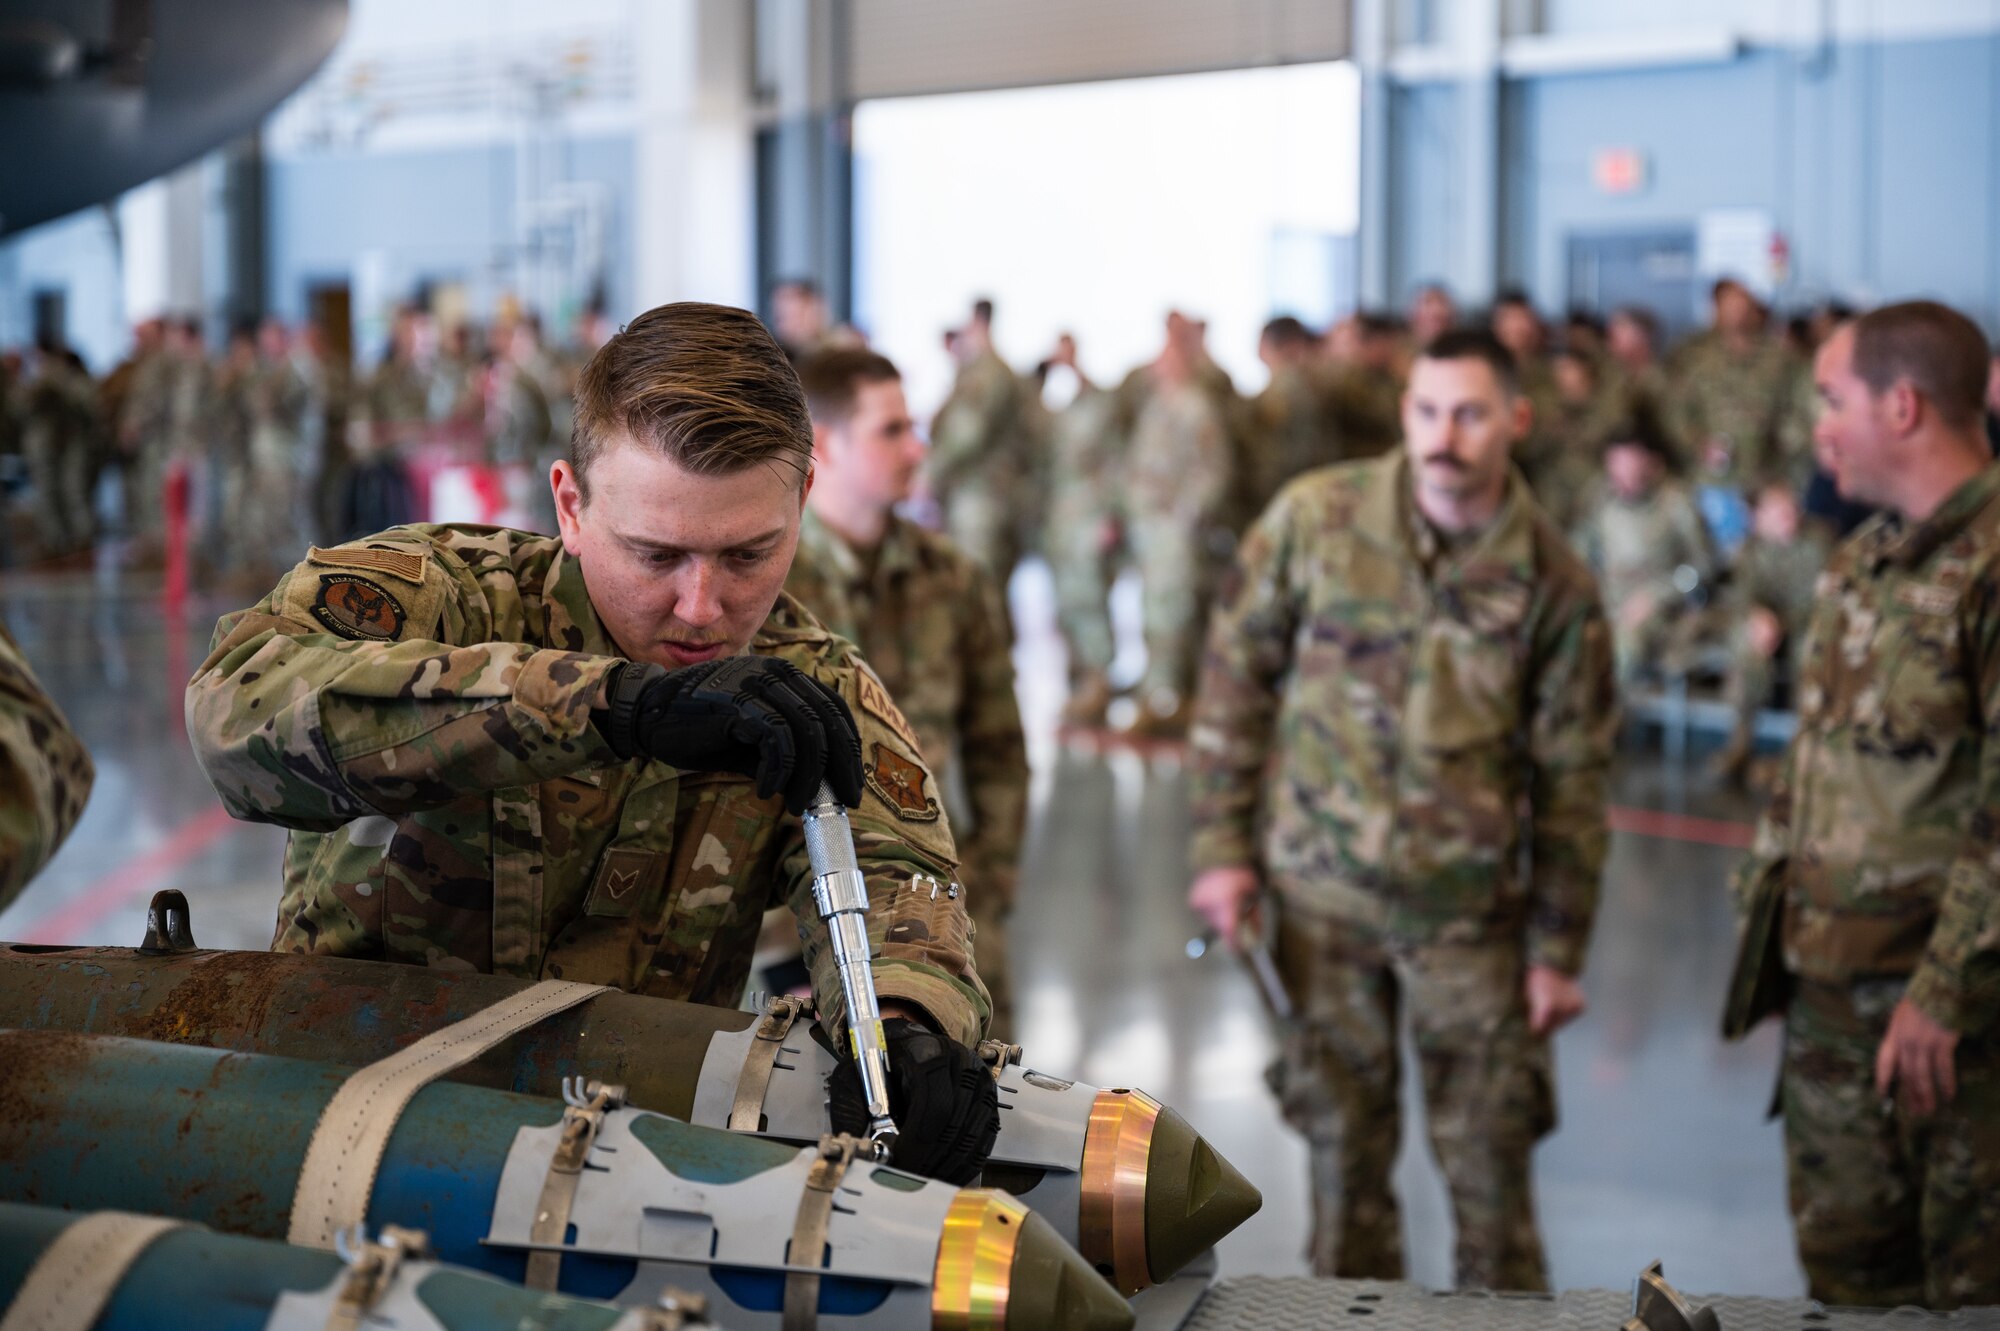 Weapons load crews compete by loading munitions onto their respective aircraft while being judged on speed, safety and accuracy.